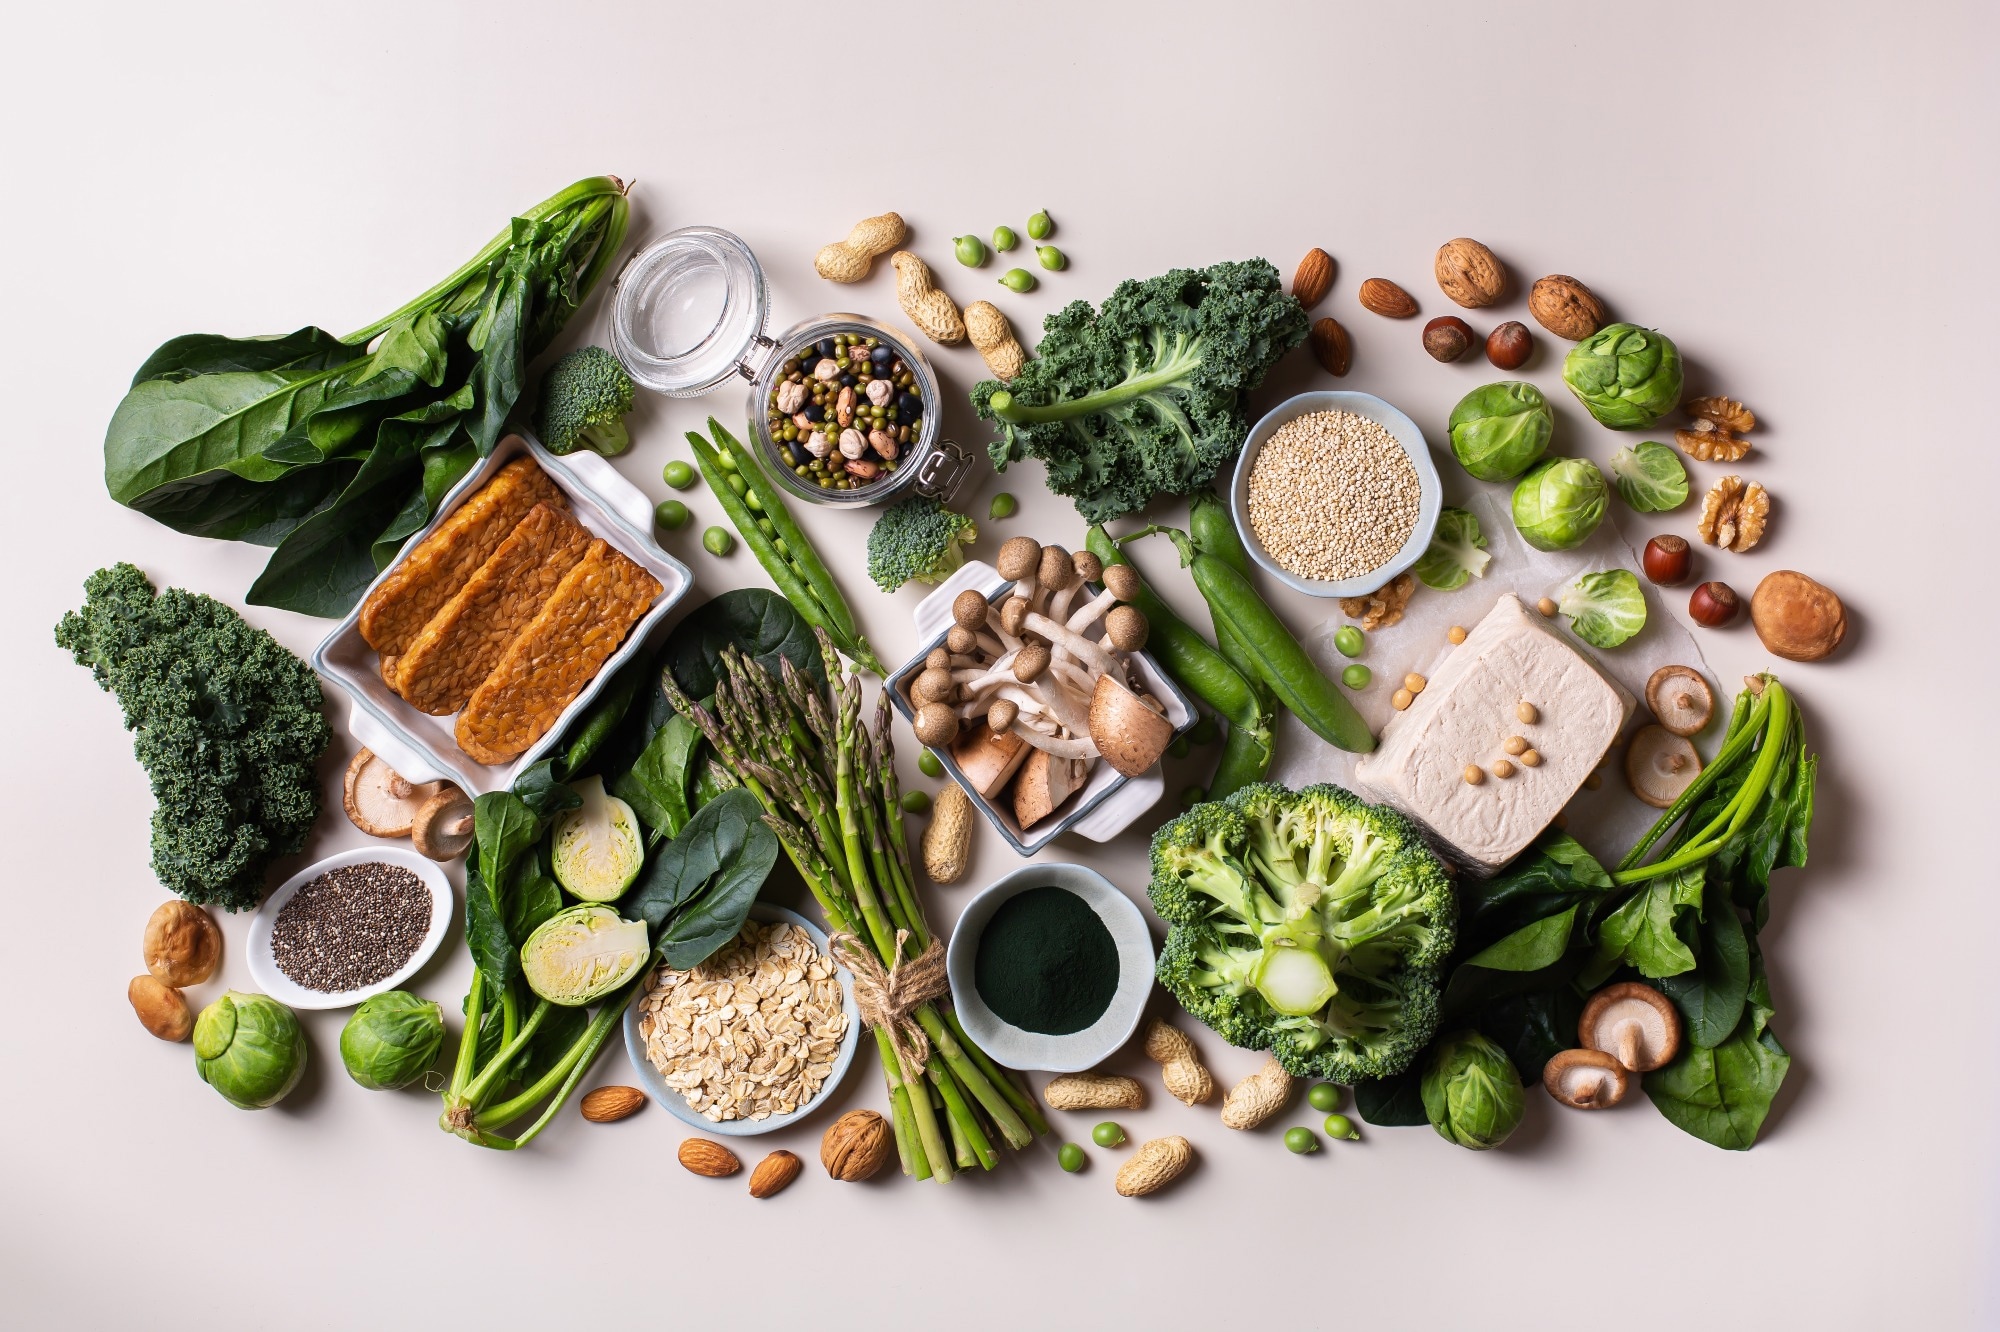 Study: Effects of Plant-Based Protein Interventions, with and without an Exercise Component, on Body Composition, Strength and Physical Function in Older Adults: A Systematic Review and Meta-Analysis of Randomized Controlled Trials. Image Credit: Antonina Vlasova / Shutterstock.com